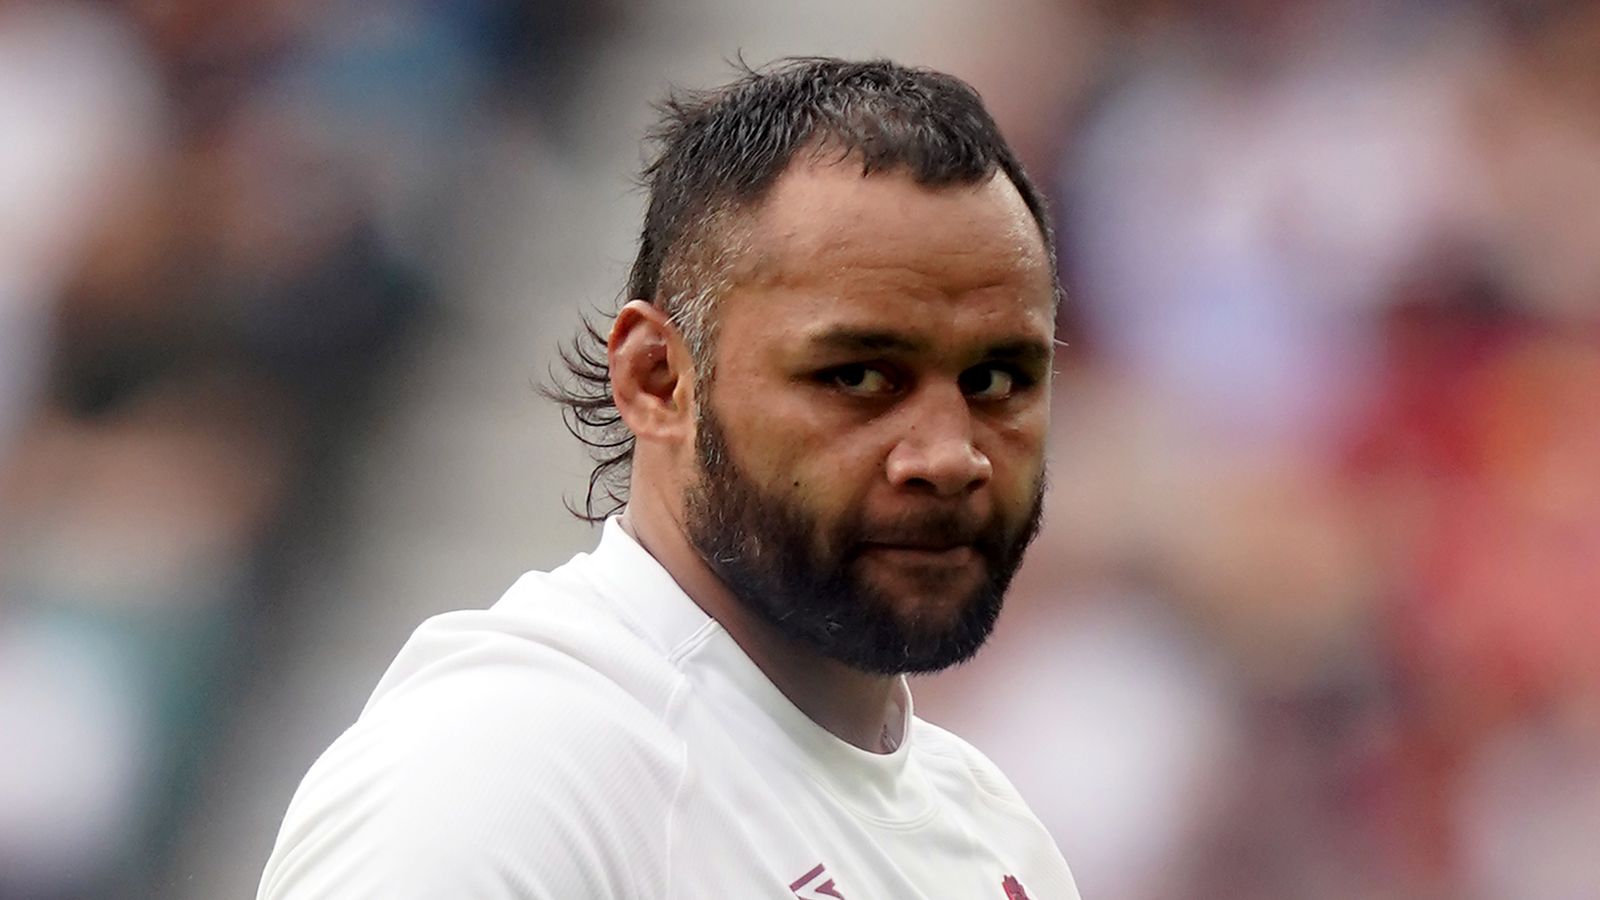 Billy Vunipola 'quietly confident' ahead of England's World Cup quarter-final clash with Fiji | Rugby Union News